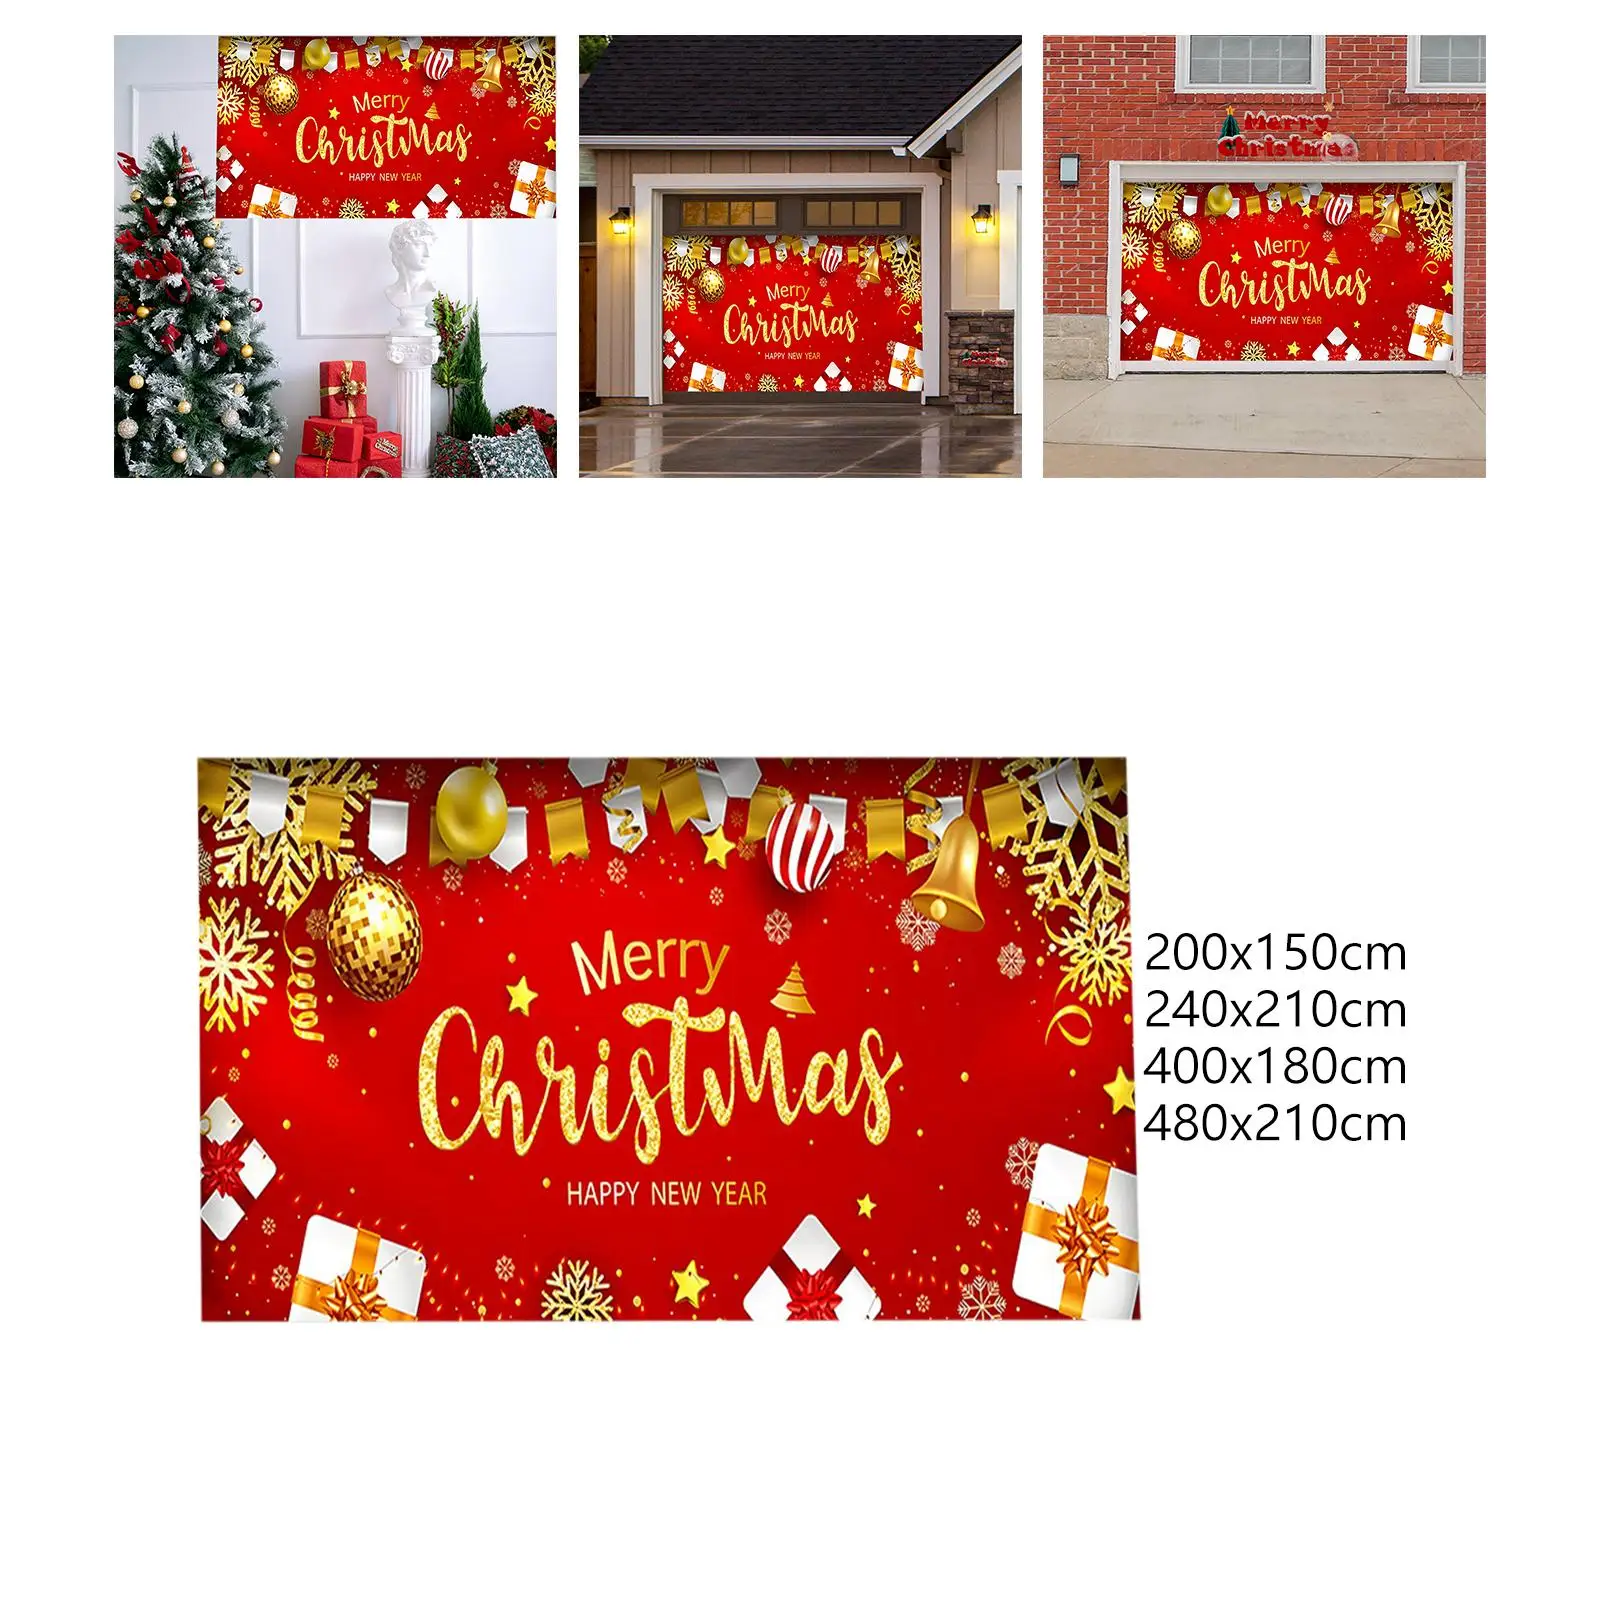 Large Christmas Garage Door Banner Happy New Year Backdrop Decor Red Merry Christmas Decorations Xmas Garage Door Mural for Home